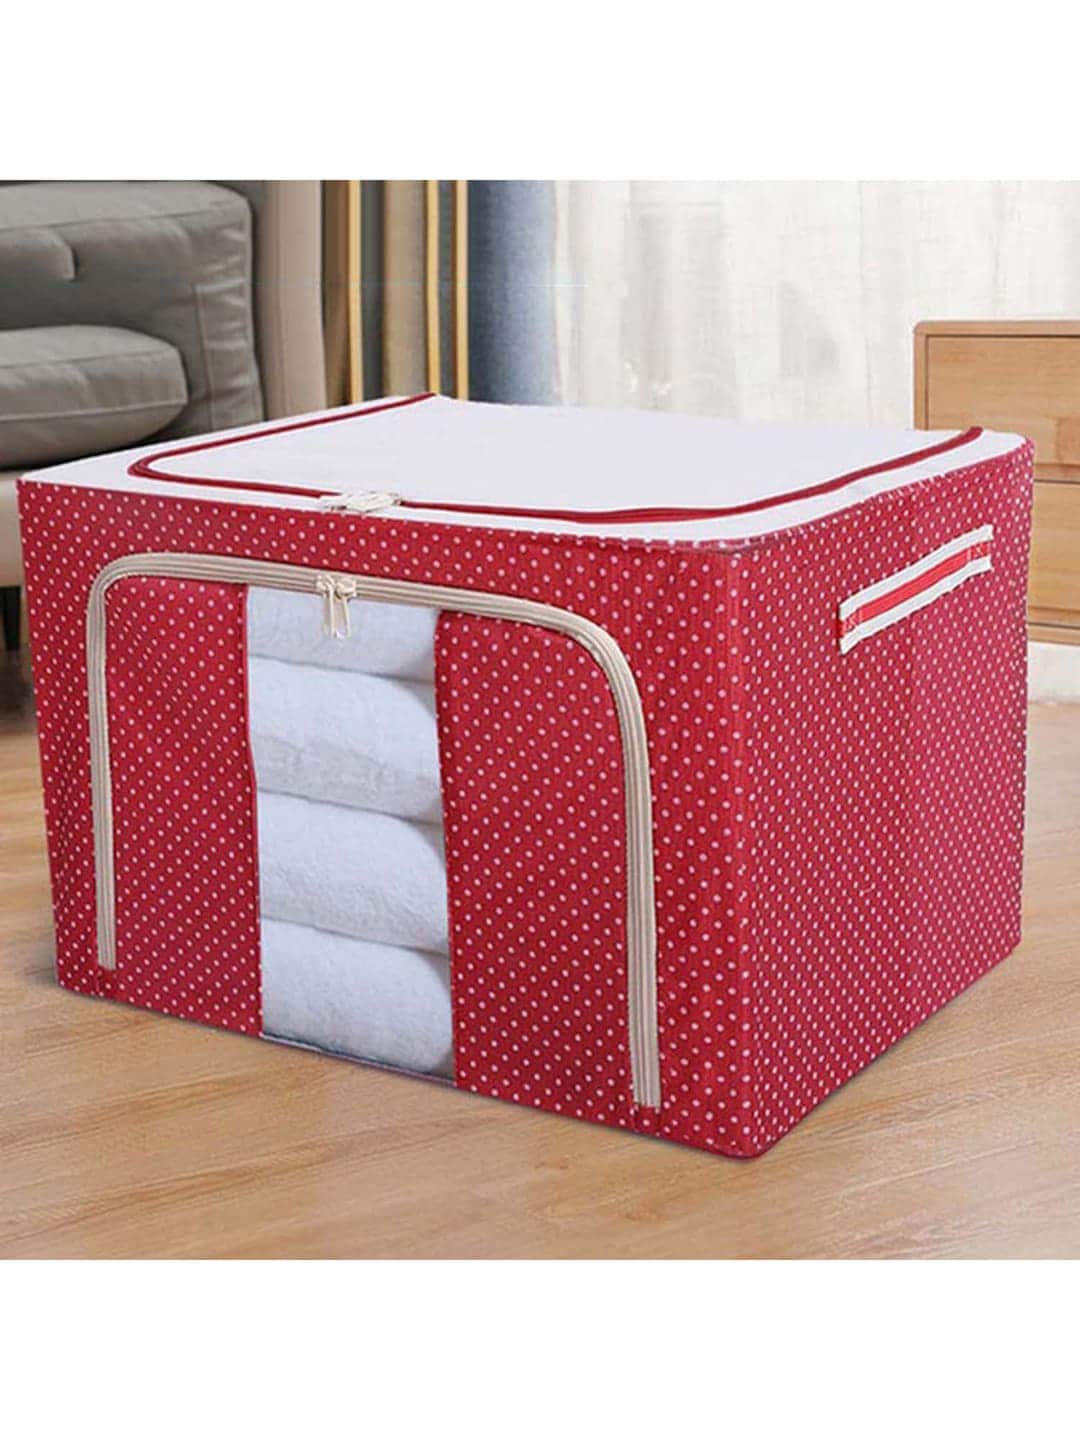 HOUSE OF QUIRK Red Printed Foldable Large Capacity Cloth Storage Box Price in India